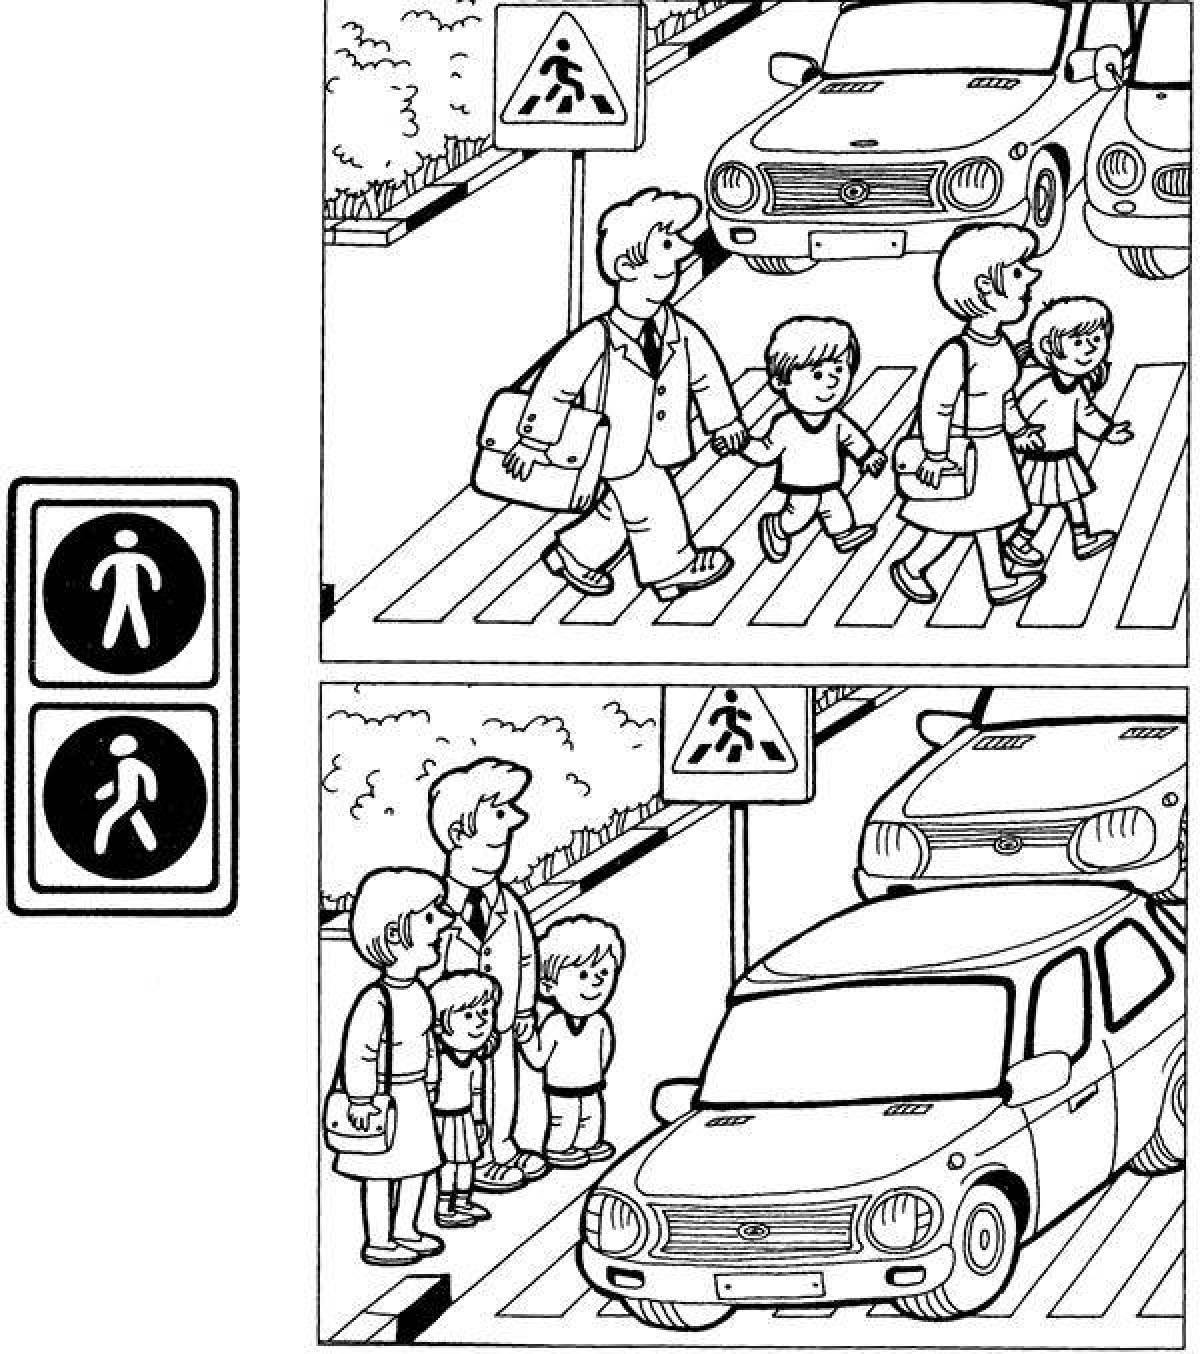 According to traffic rules for preschoolers #7